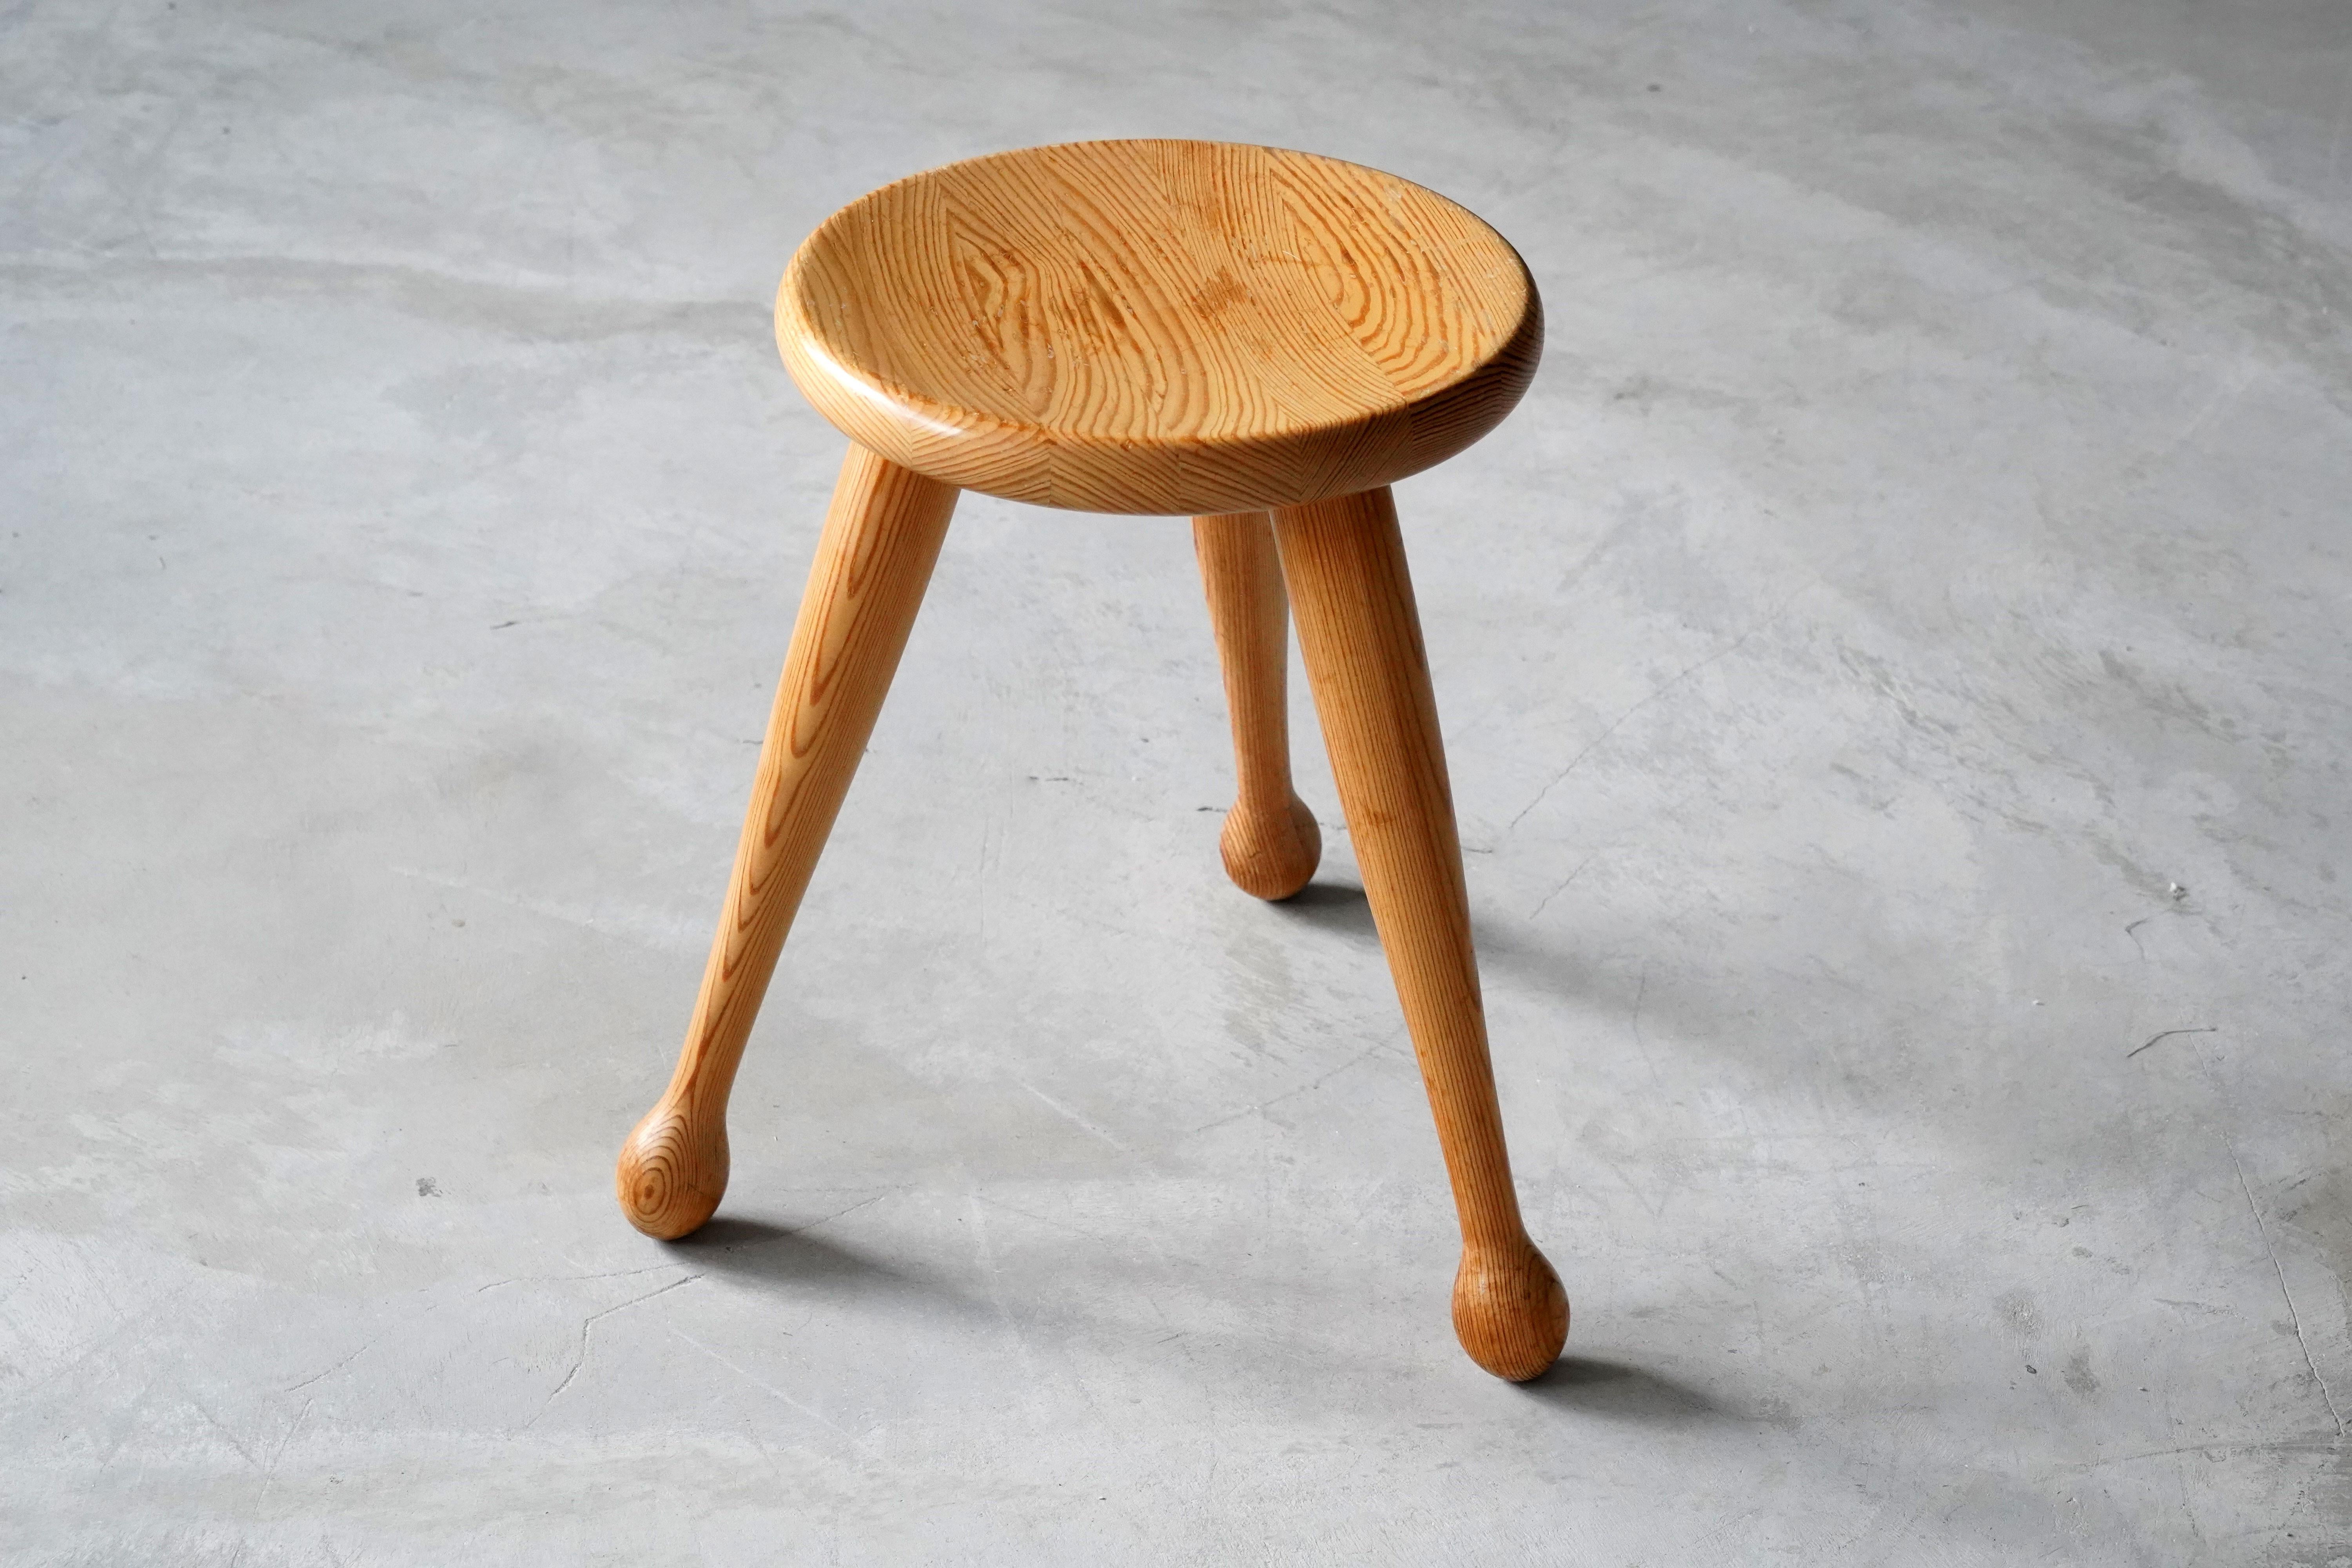 A rare stool, produced by Möbelkompaniet Ahl & Wallén. In finely turned solid pine. Labeled. 

Other designers of the period include Philip Arctander, Josef Frank, Axel Einar Hjorth, Charlotte Perriand, and Pierre Chapo.